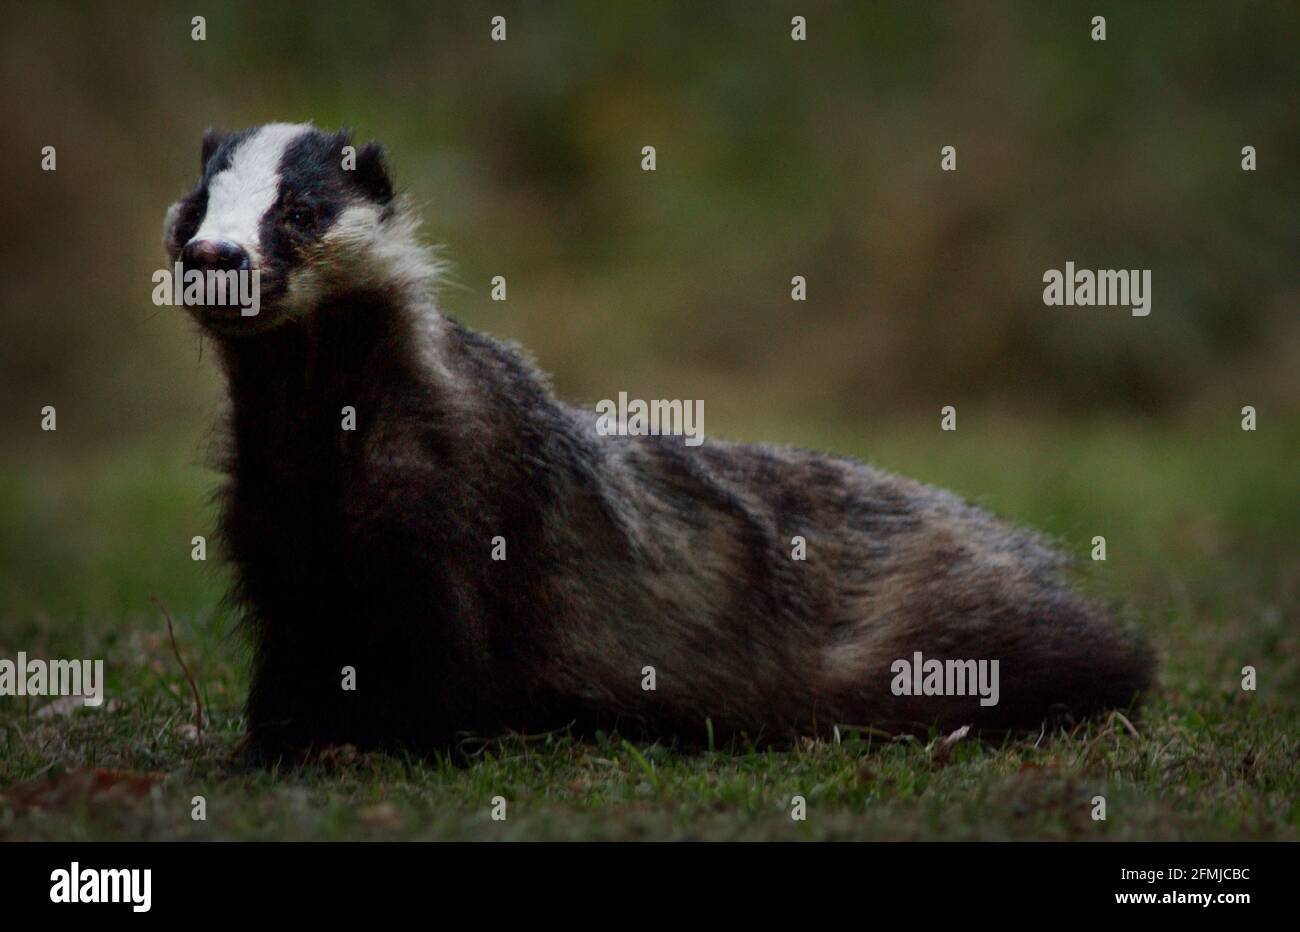 A BADGER NICKNAMED 'LITTLE BASTARD' IN CHRIS NEWMANS GARDEN IN THE MIDDLE OF   WYTHAM WOODS NR OXFORD. Stock Photo